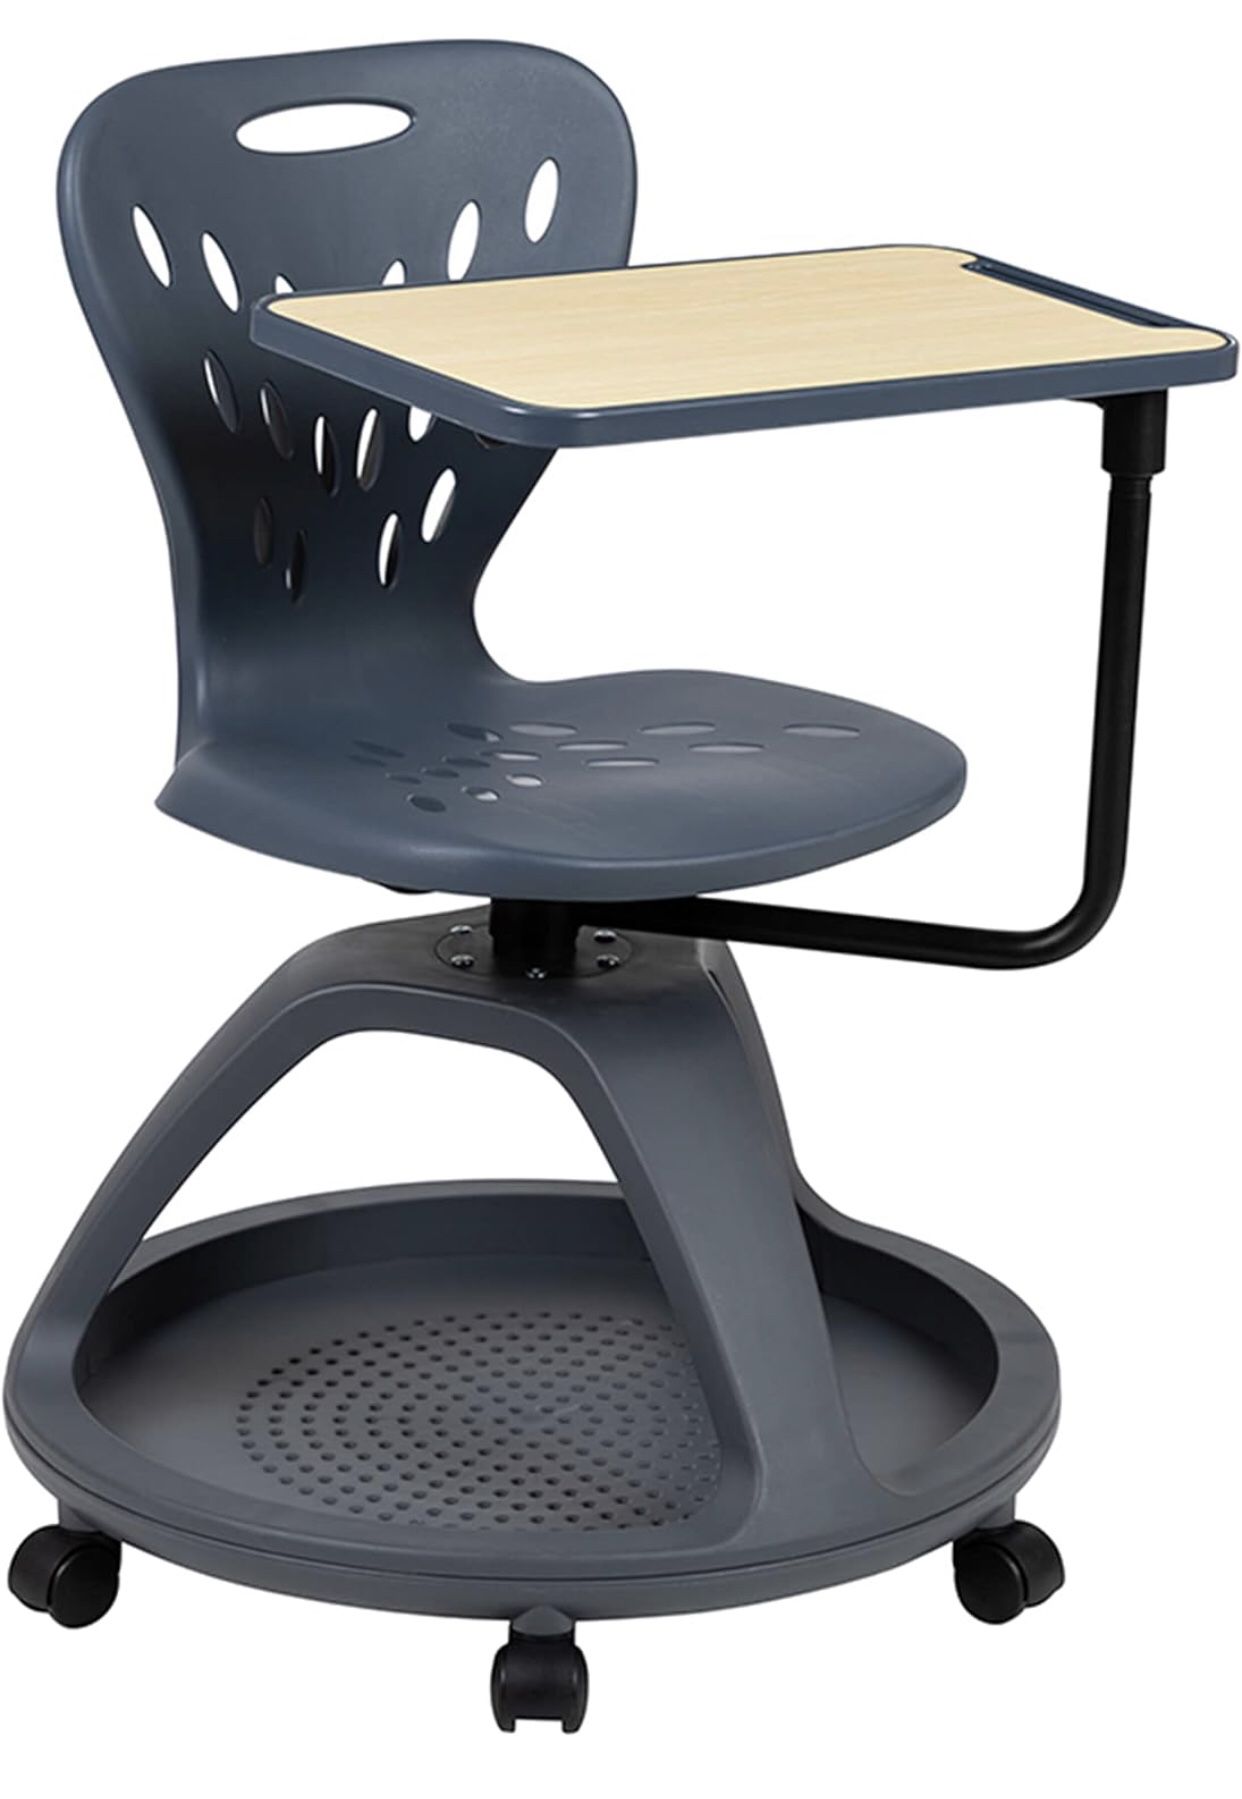 NEW! Mobile Desk Chair with 360-Degree Tablet Rotation & Under-Seat Cubby, Rolling Desk Chair, Grey